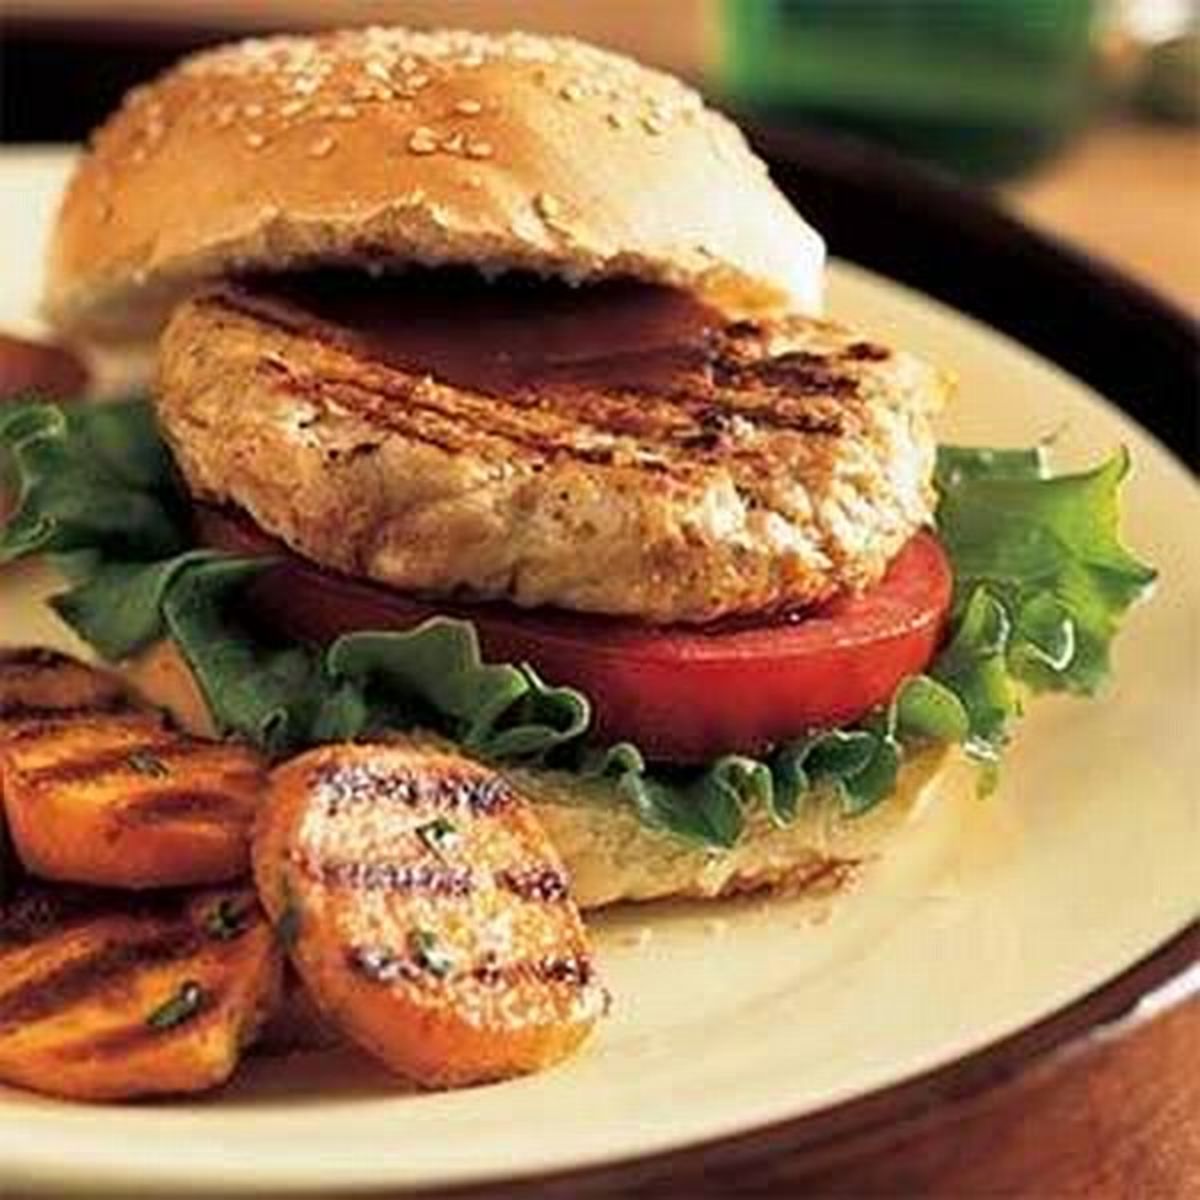 Many delicious variations for turkey burgers